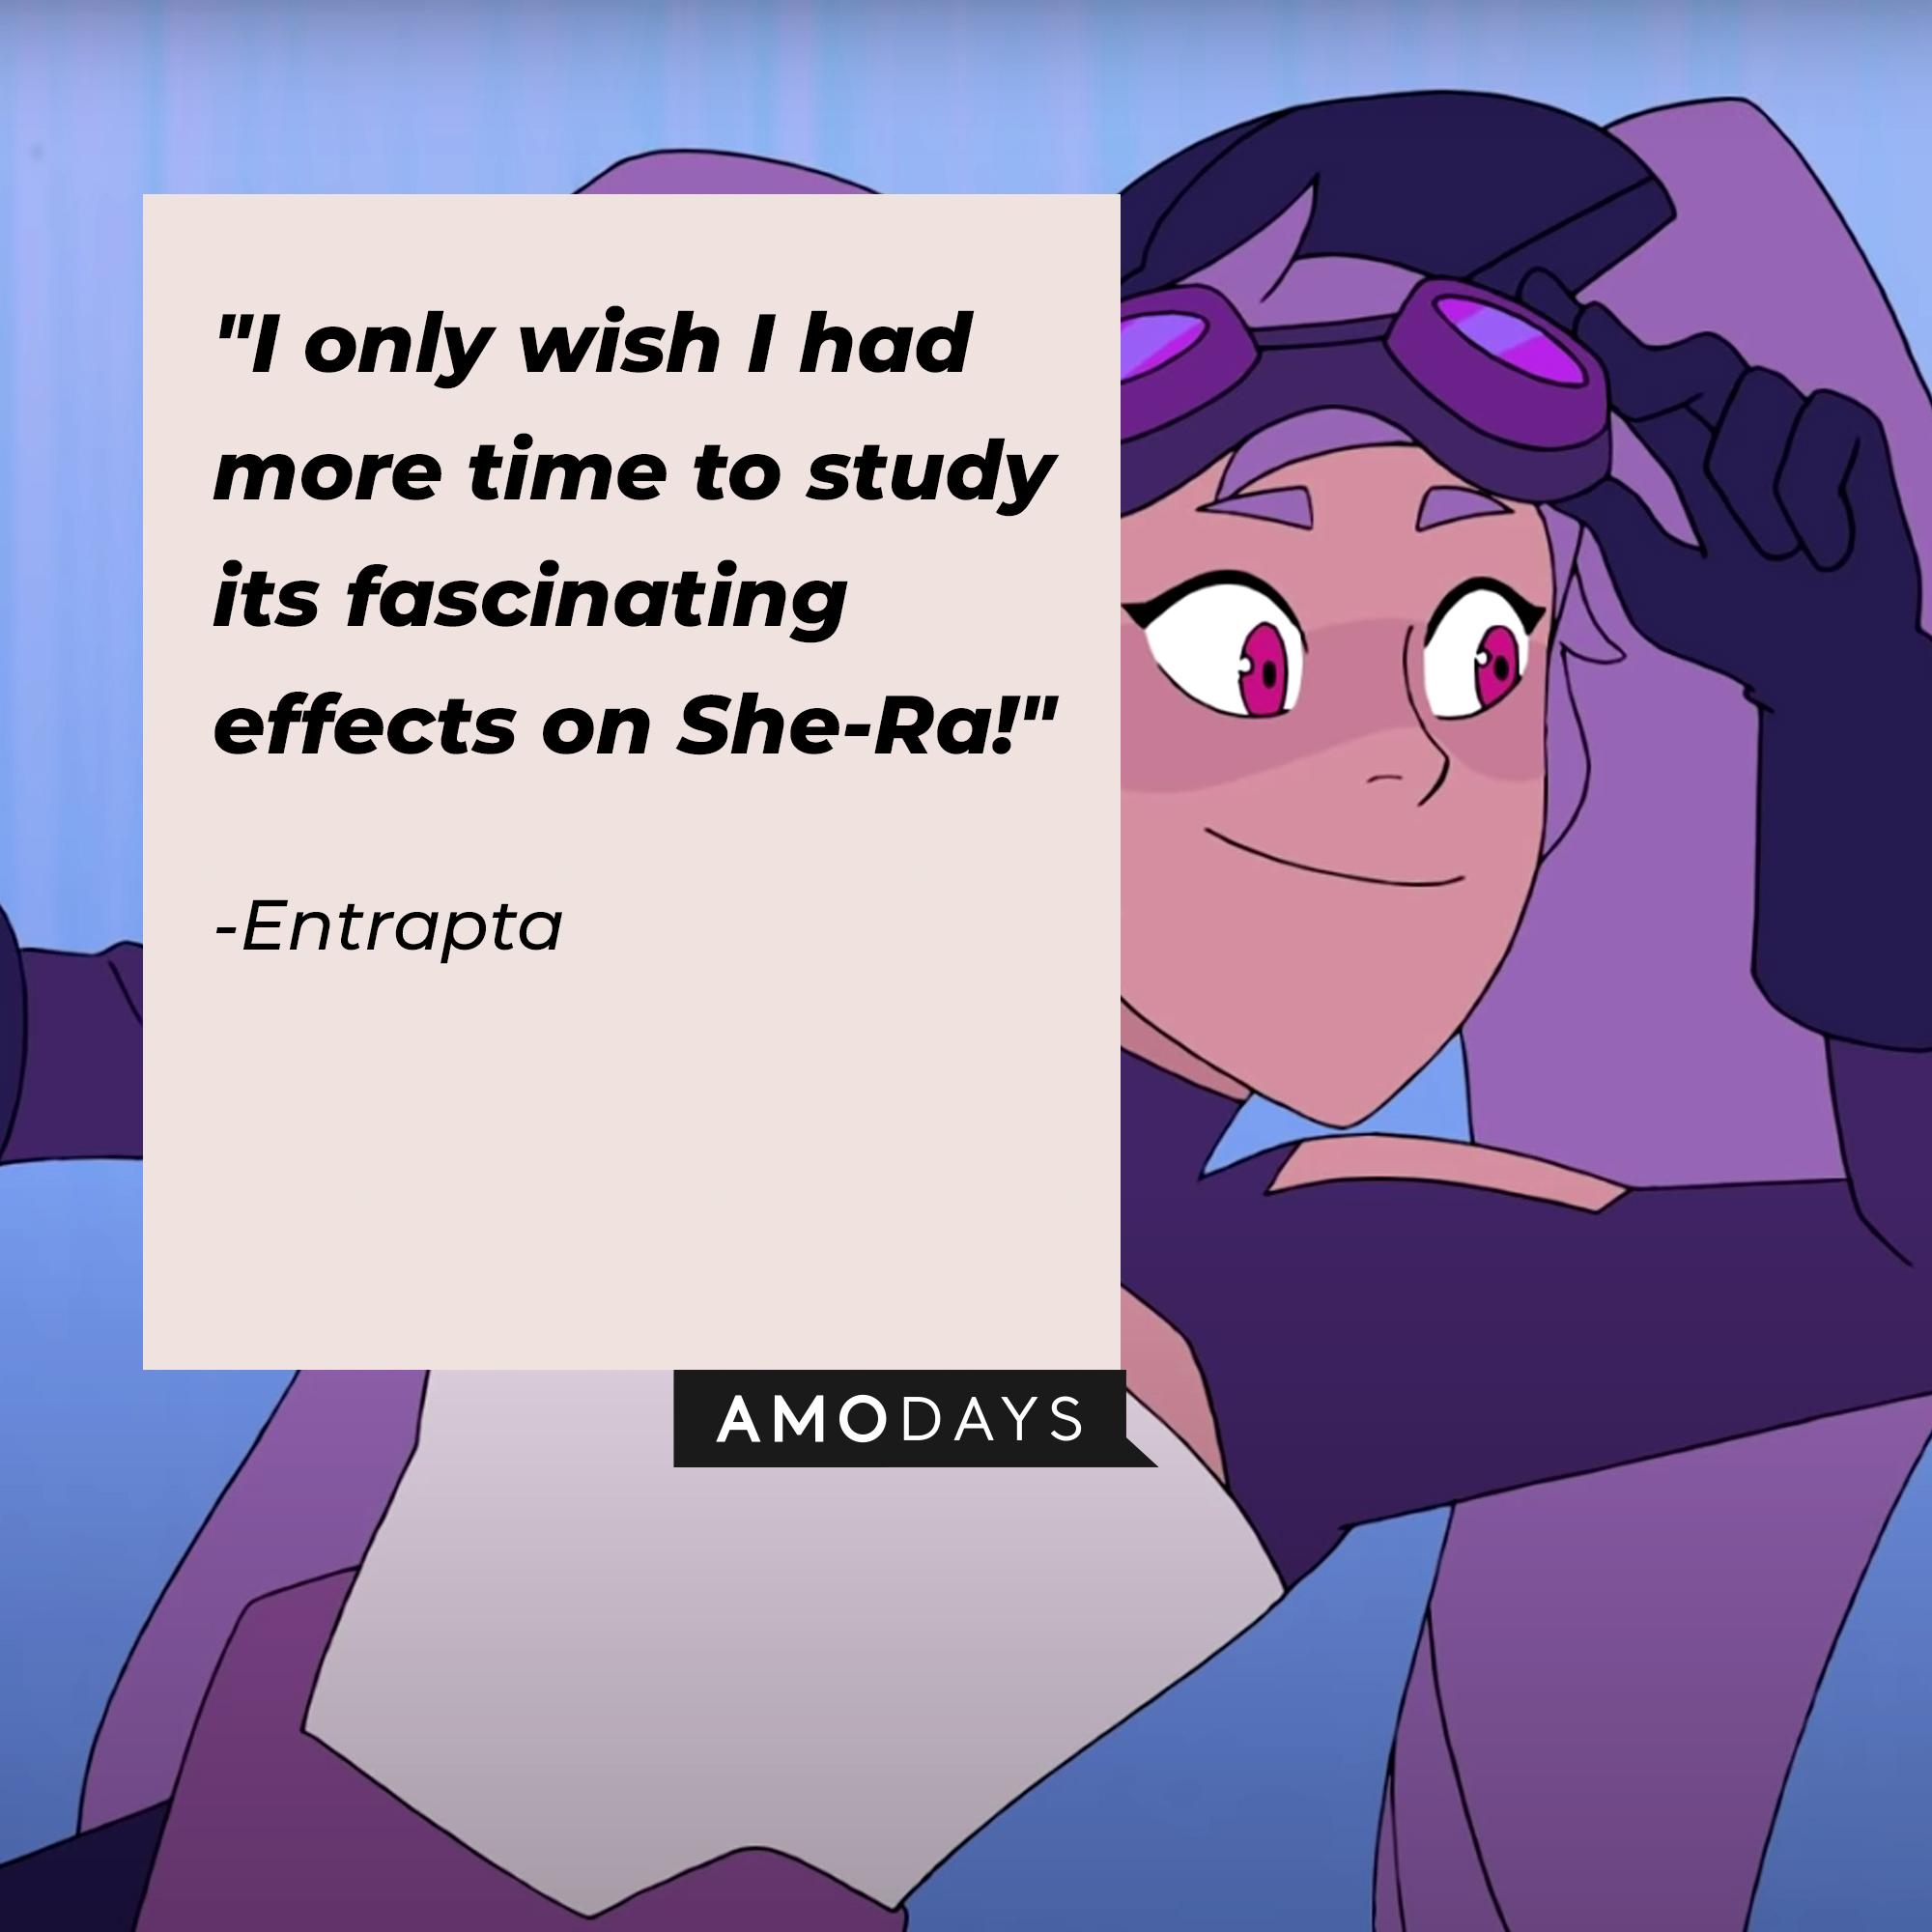 Entrapta's quote: "I only wish I had more time to study its fascinating effects on She-Ra!" | Source: youtube.com/netflixafterschool